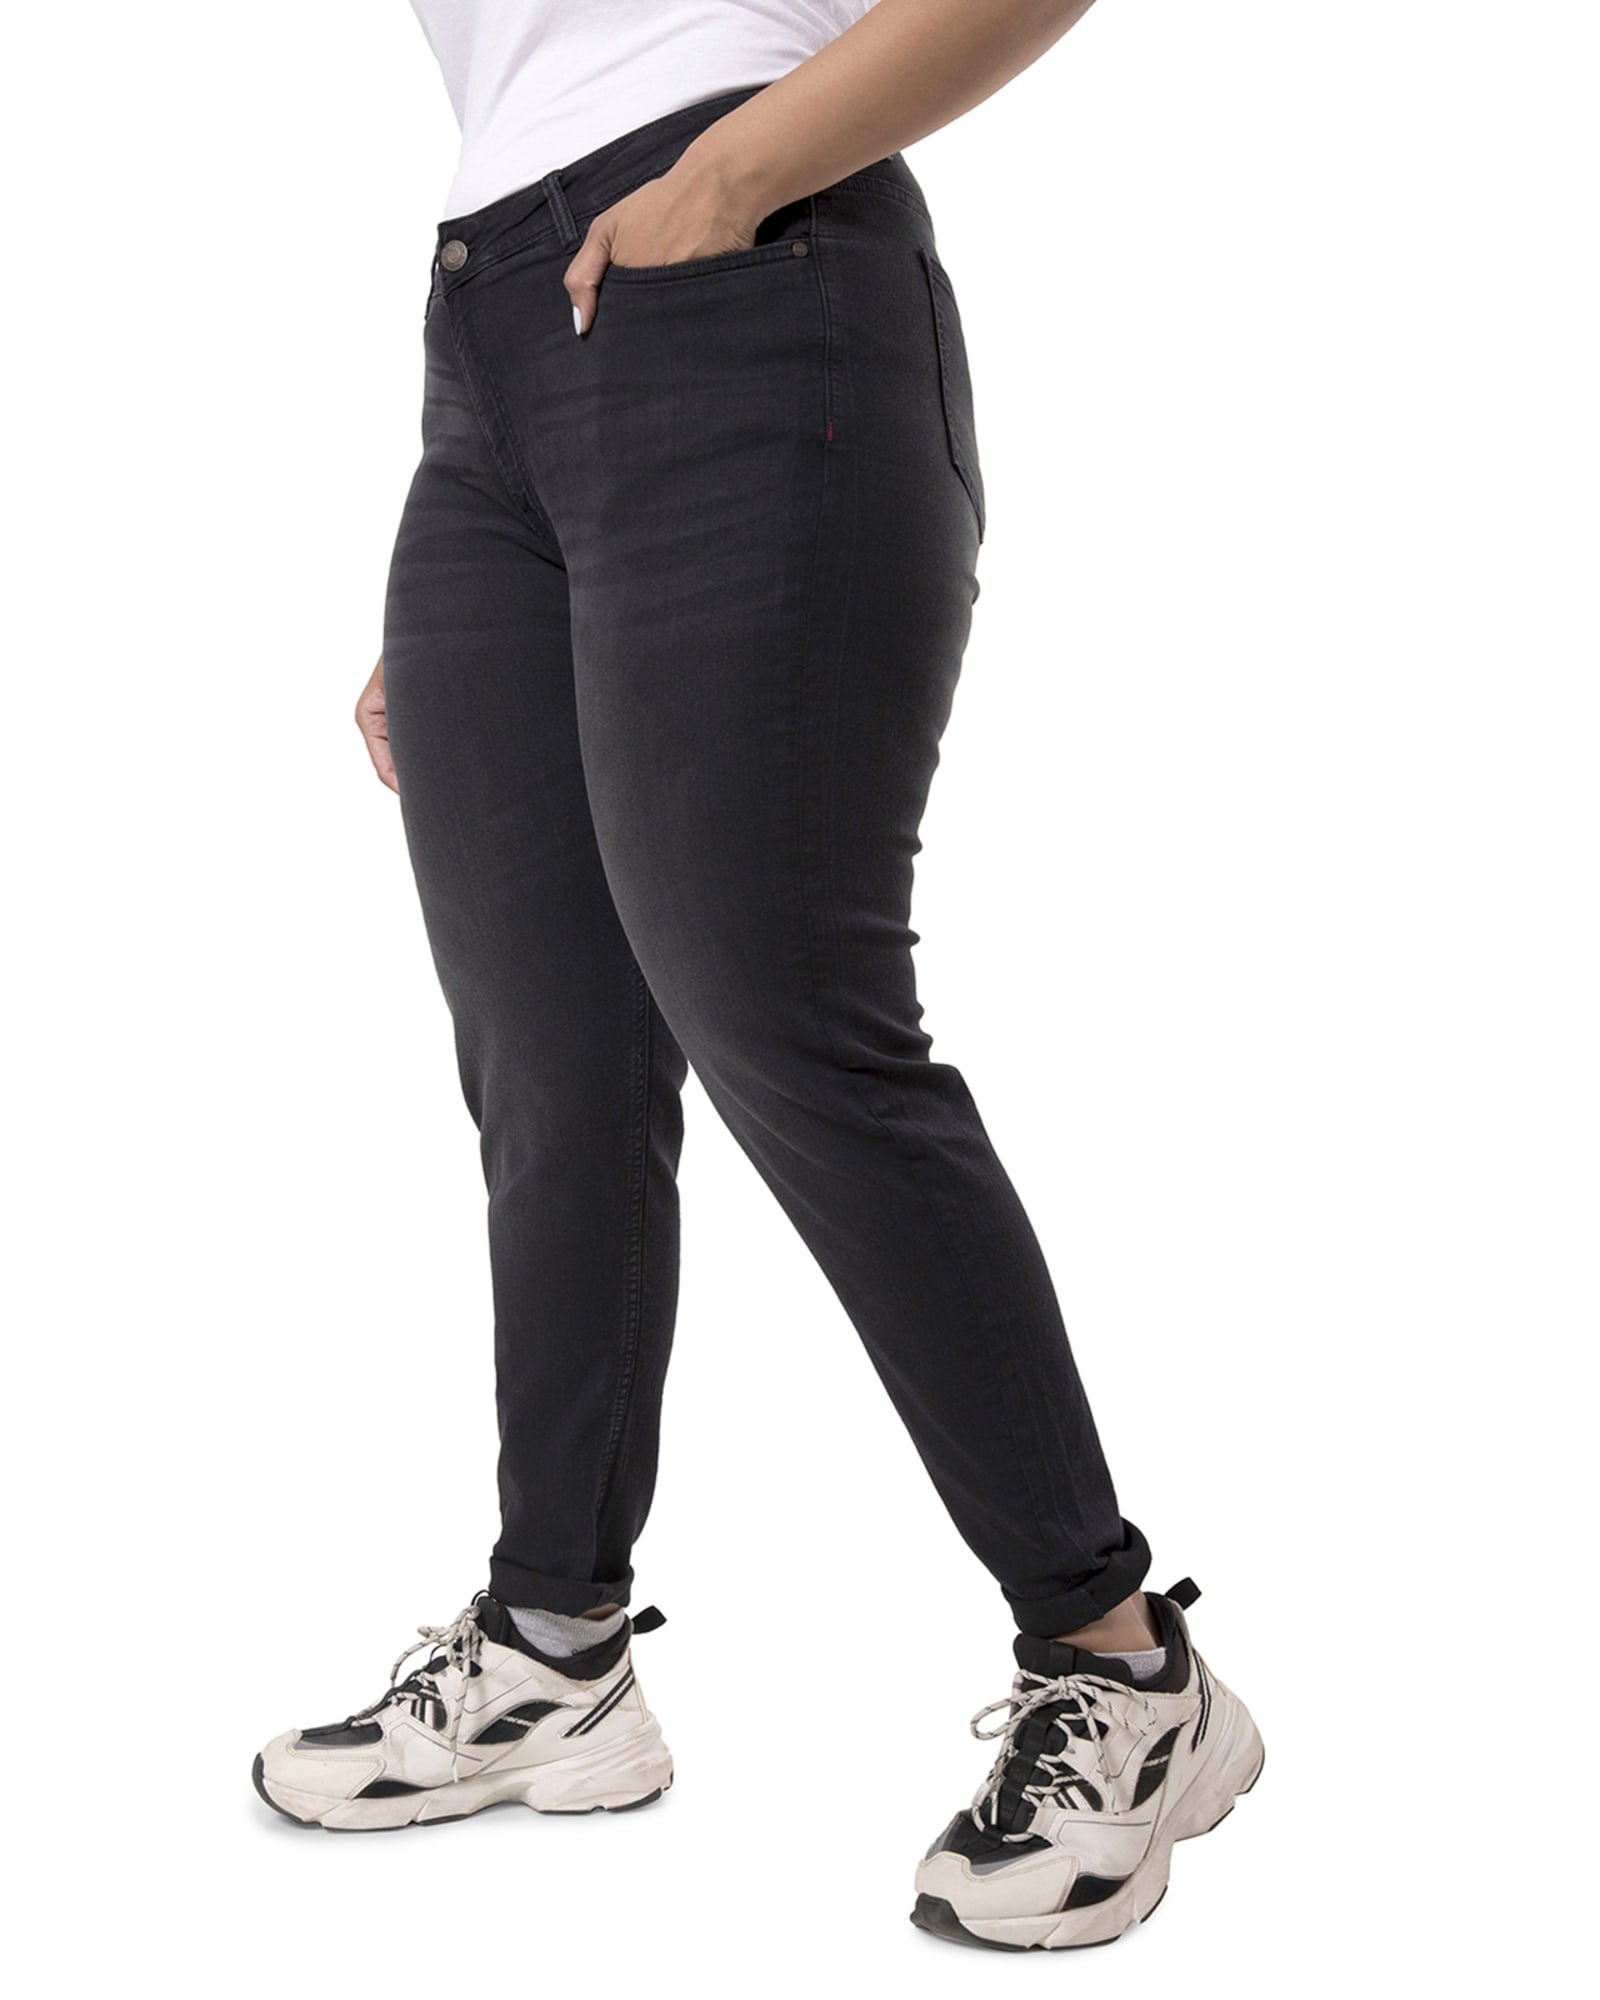 Plus Size Solid Casual Jeans